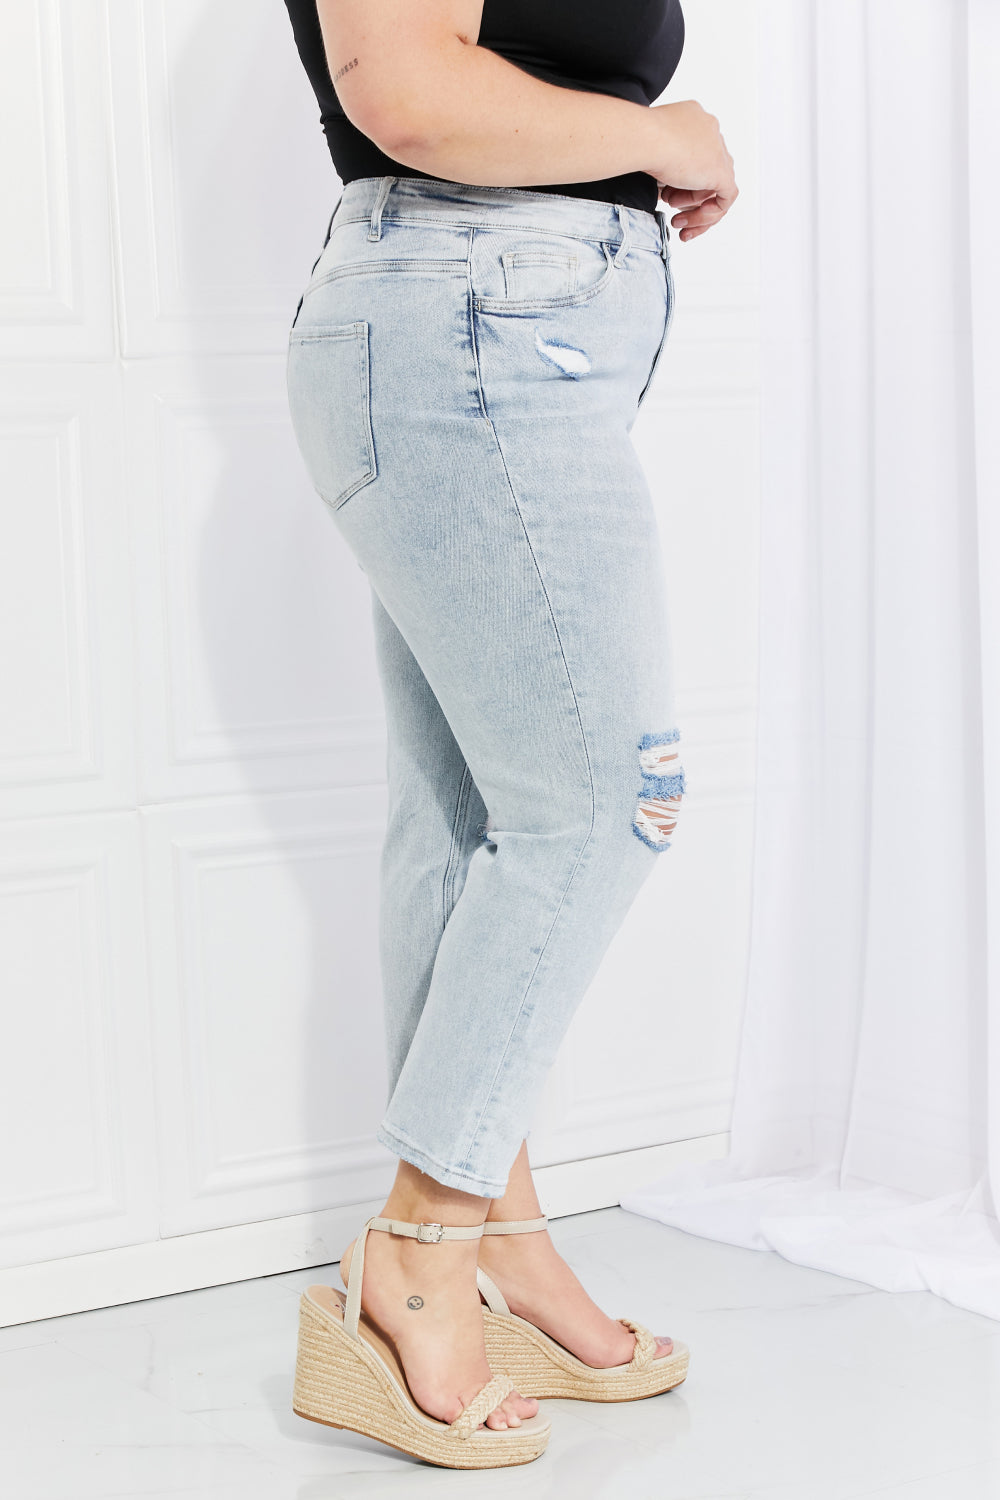 Stand Up & Stand Out Cropped Jeans